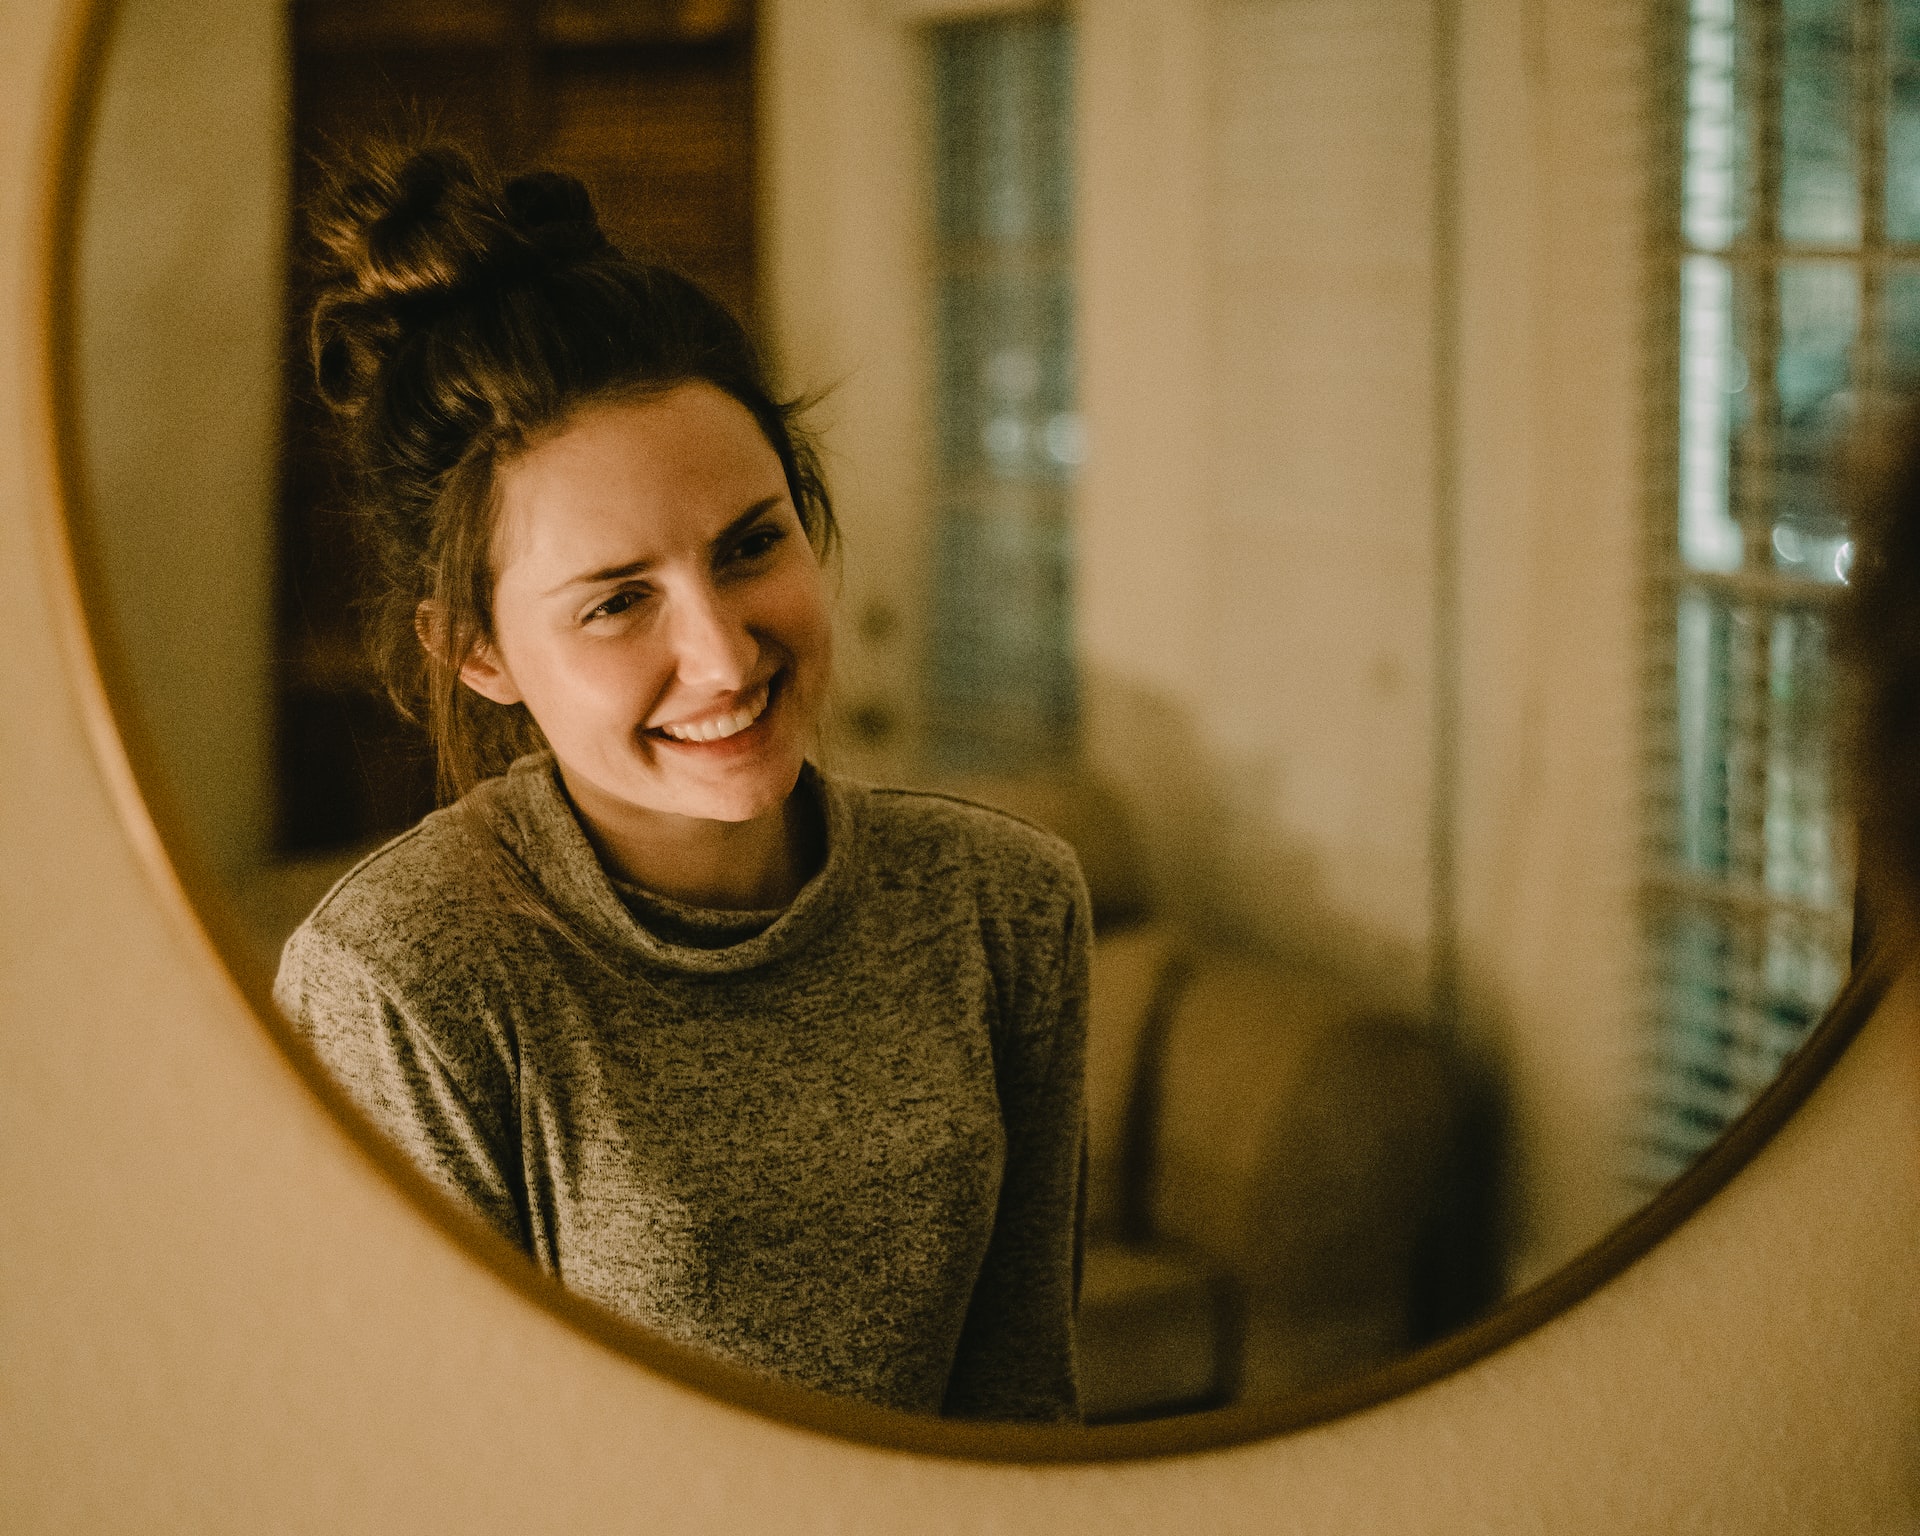 woman smiling in the mirror